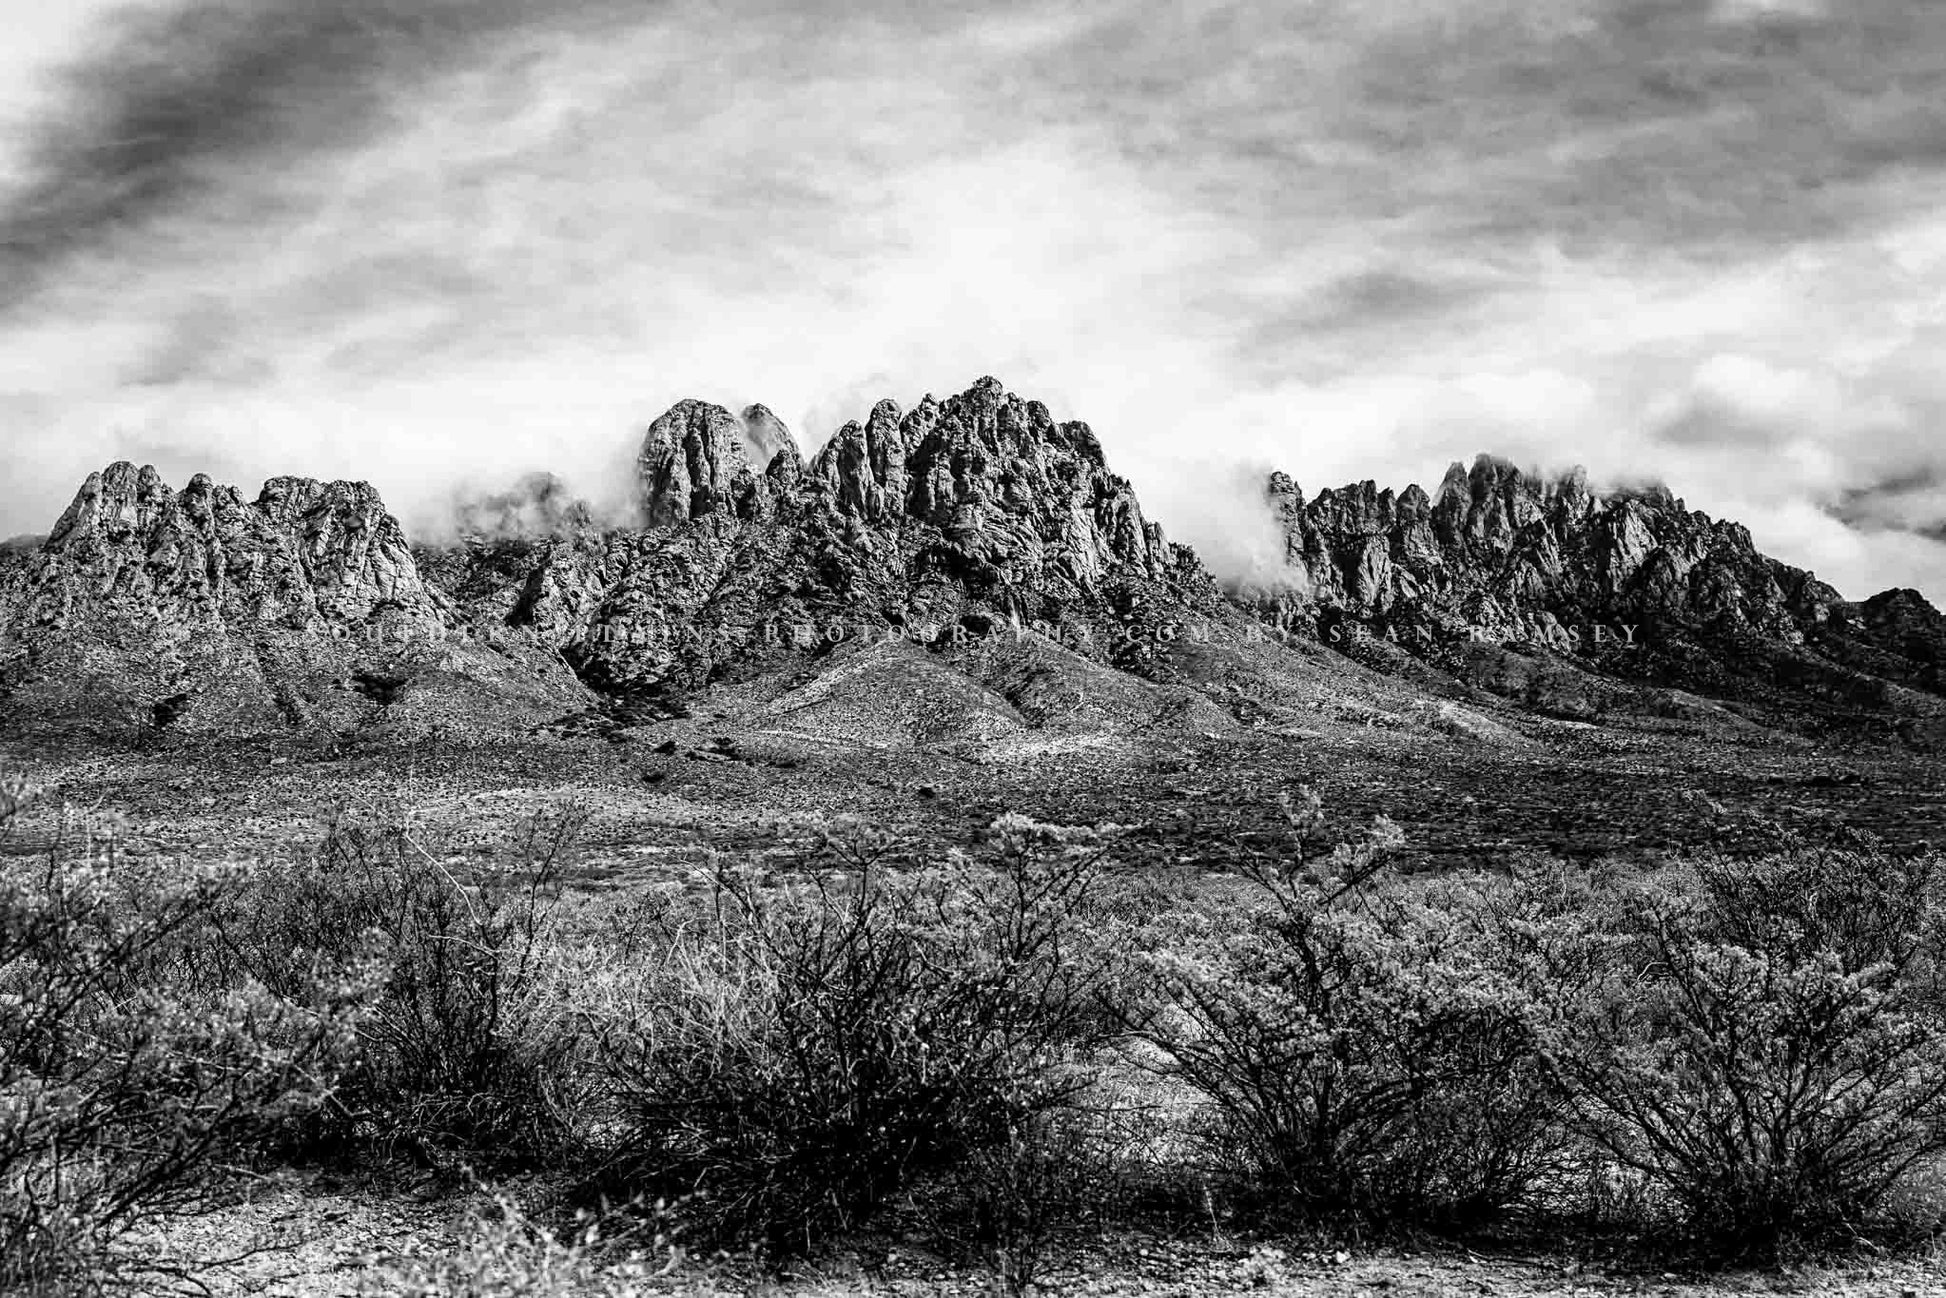 Black and white landscape photography print of the Organ Mountains rising from the Chihuahuan Desert floor as clouds roll over the peaks near Las Cruces, New Mexico by Sean Ramsey of Southern Plains Photography.